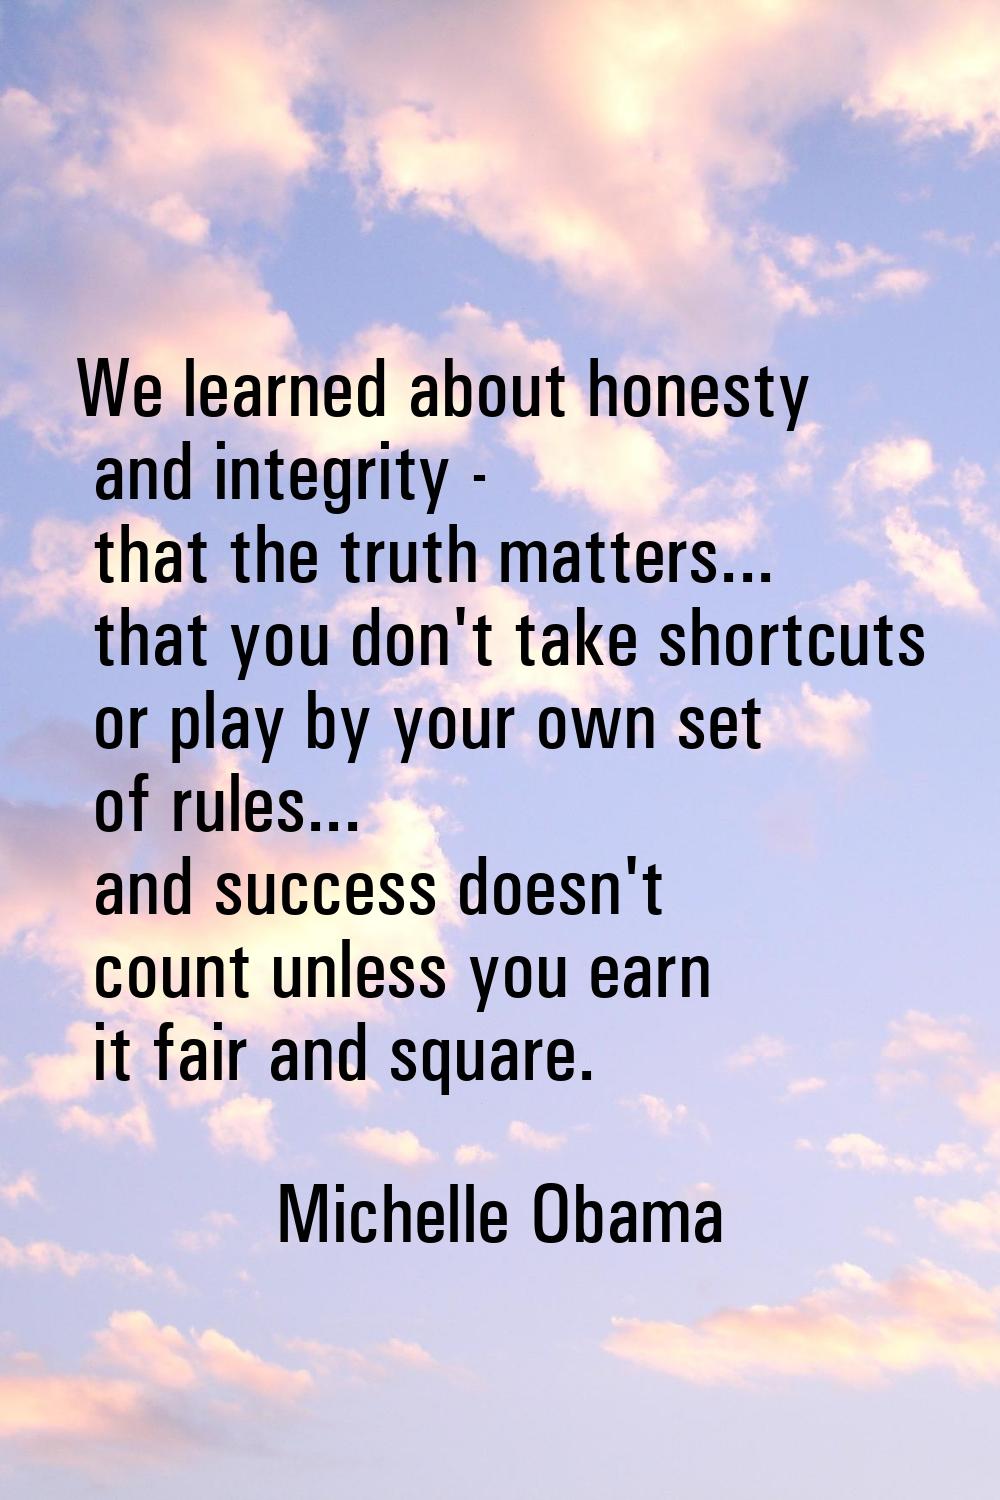 We learned about honesty and integrity - that the truth matters... that you don't take shortcuts or